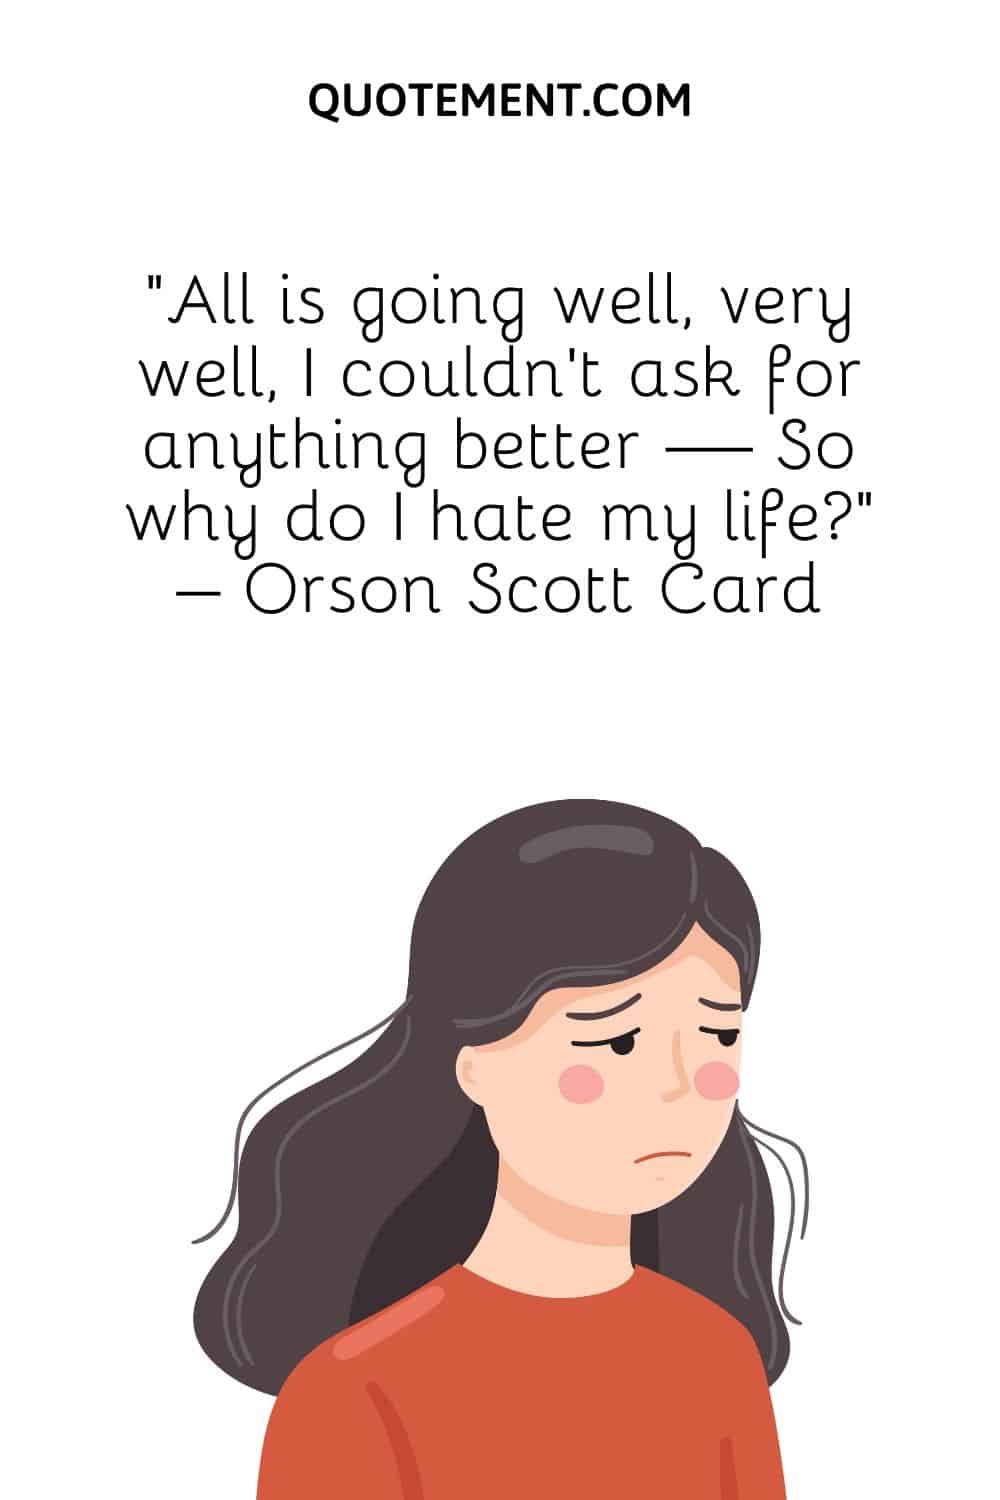 “All is going well, very well, I couldn’t ask for anything better — So why do I hate my life” – Orson Scott Card